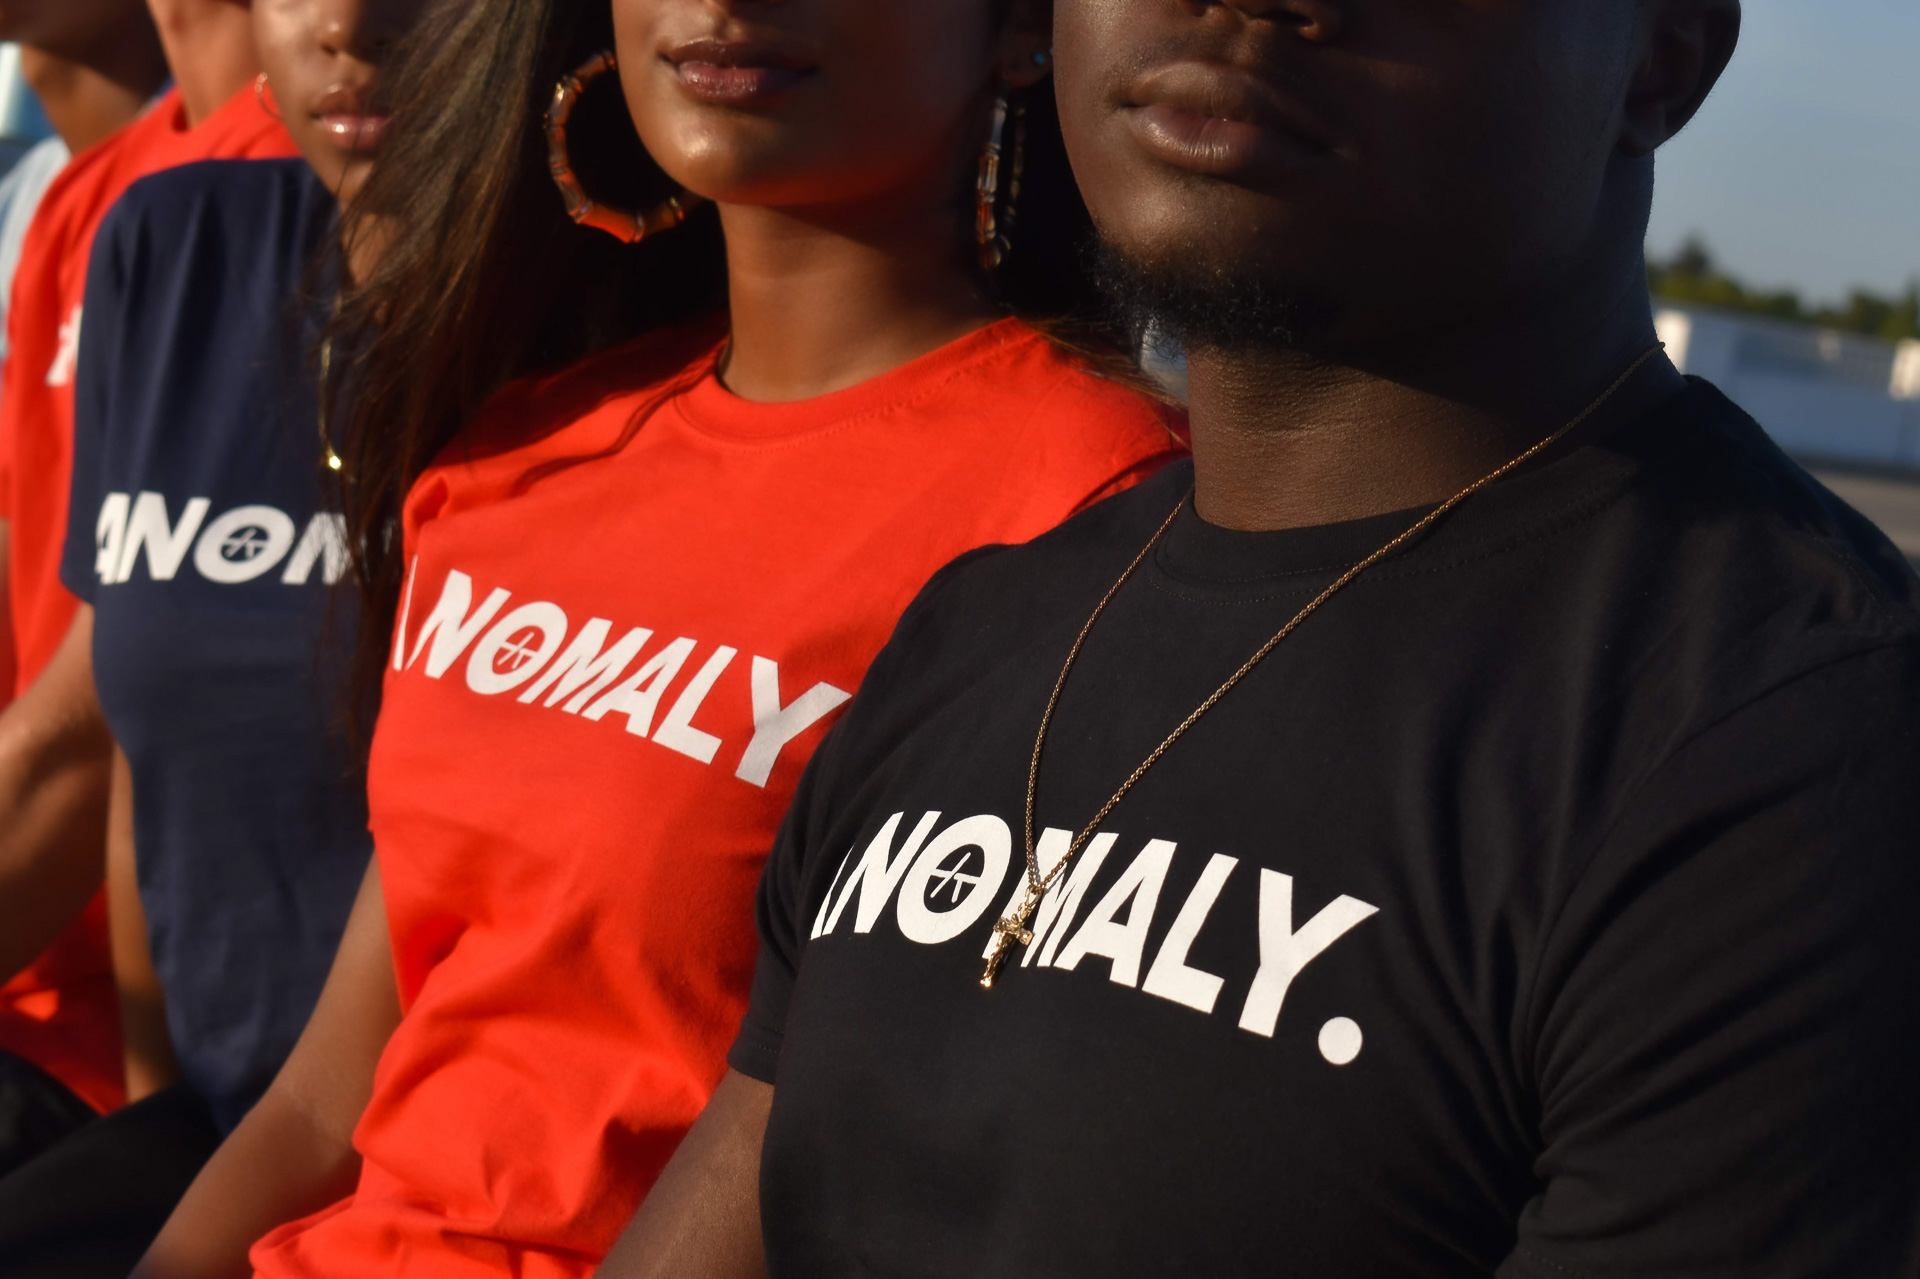 An anomaly: Jye Citizen owns his individuality, launches lifestyle and  clothing brand - The Aggie